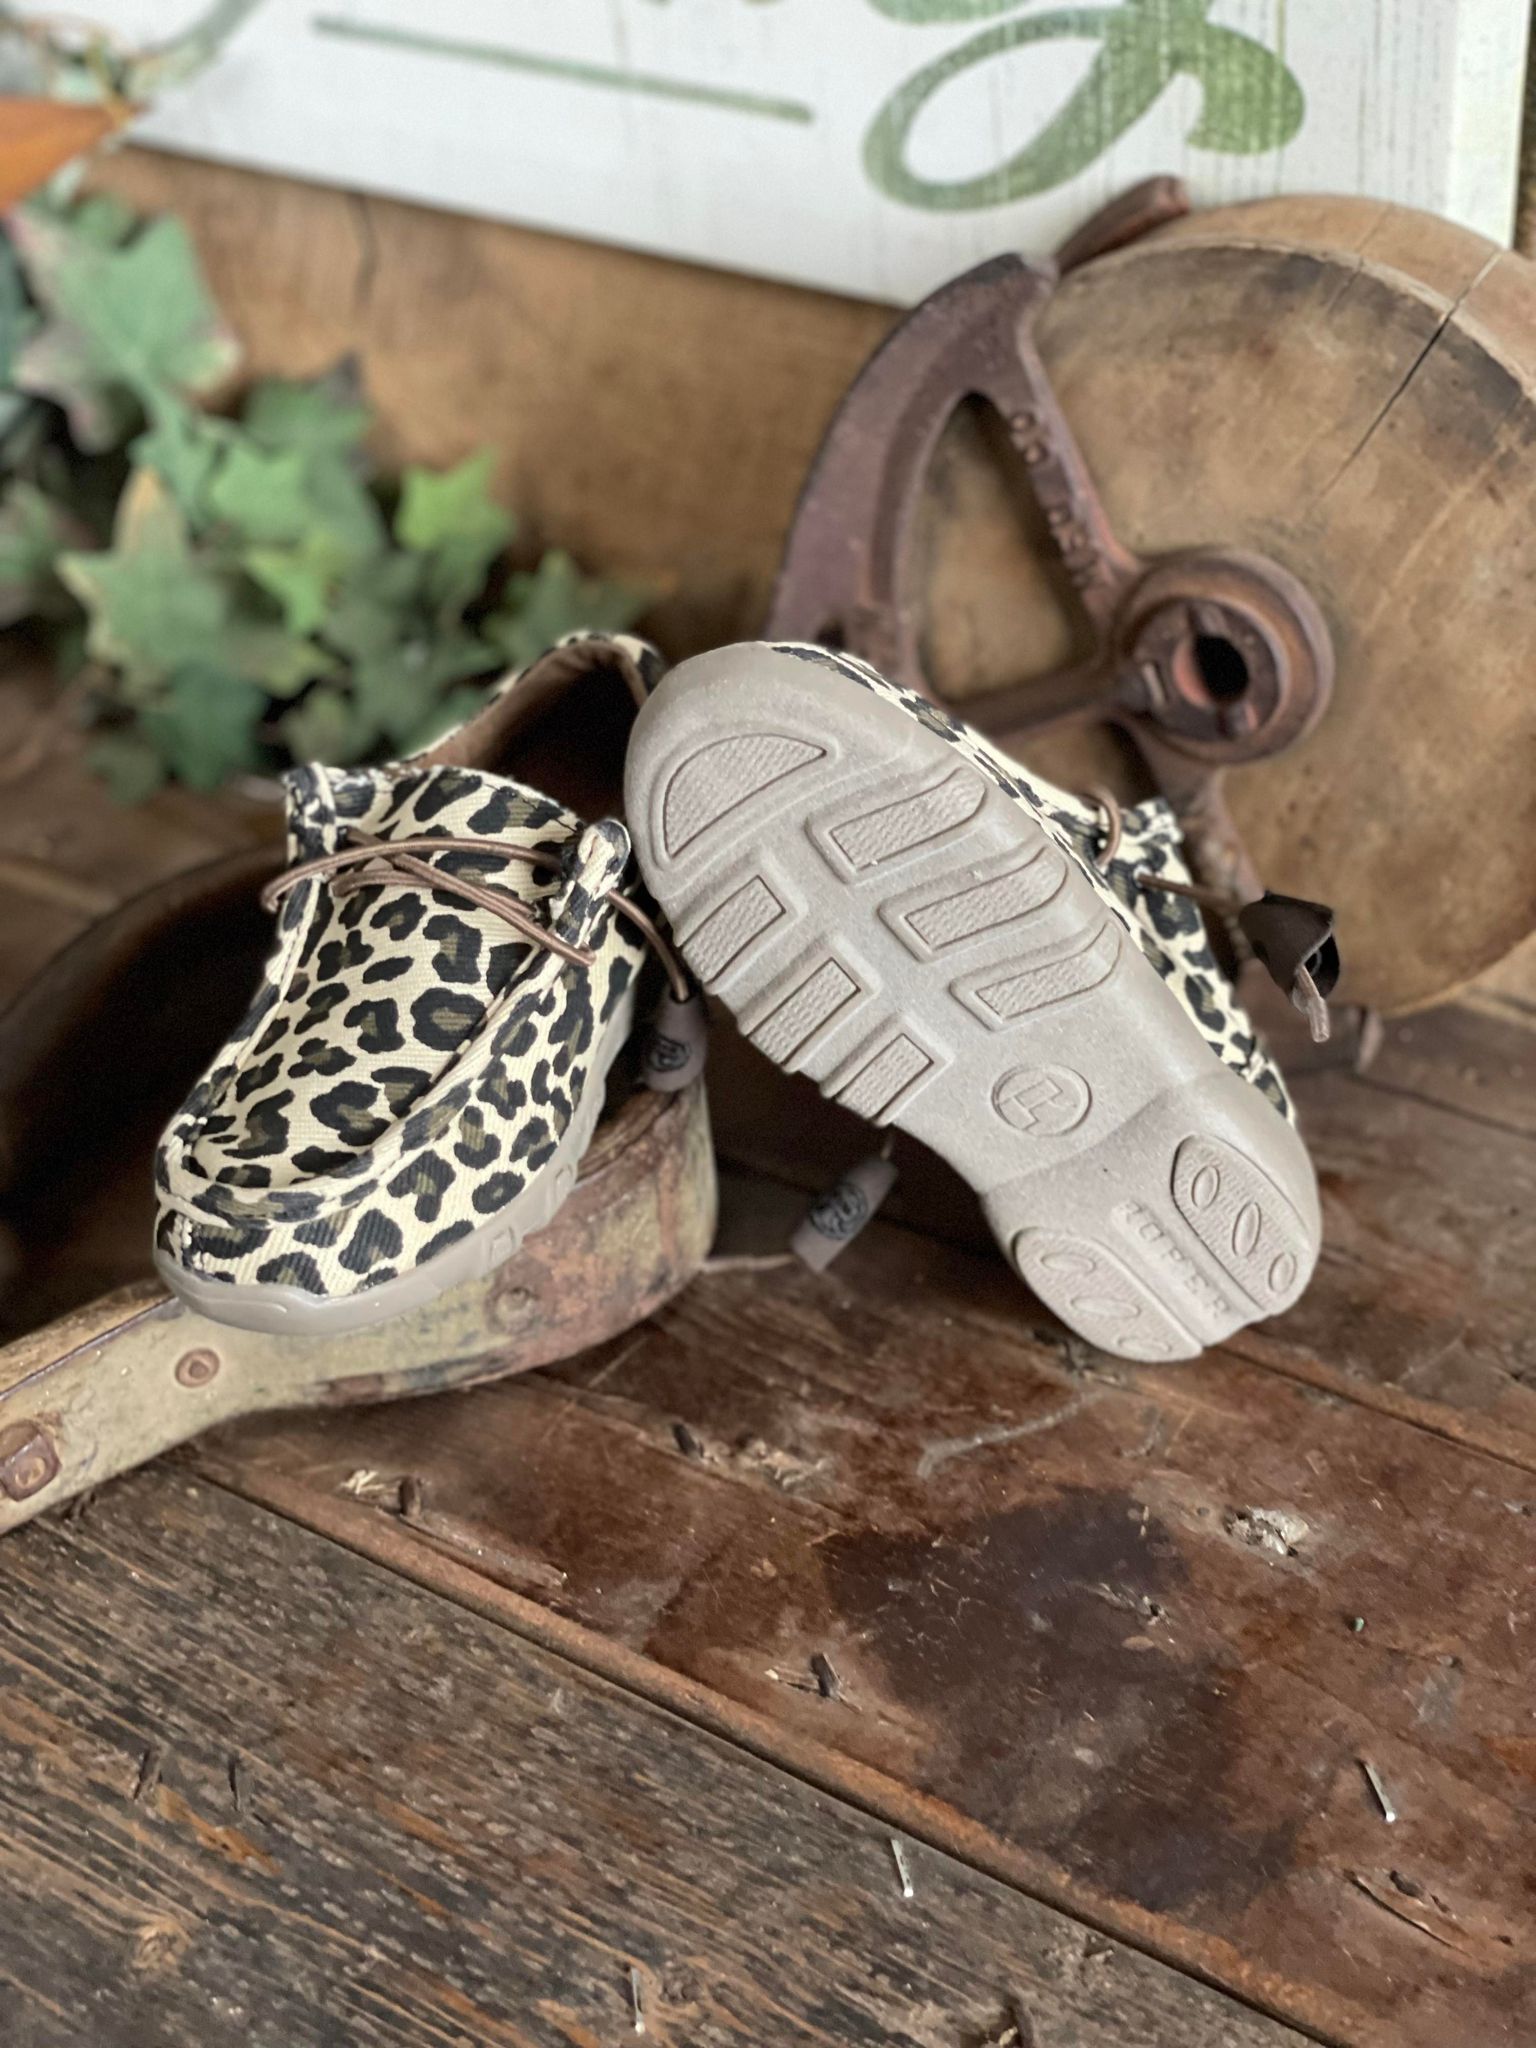 Chillin Leopard Roper Driving Mocs-Kids Casual Shoes-Roper-Lucky J Boots & More, Women's, Men's, & Kids Western Store Located in Carthage, MO